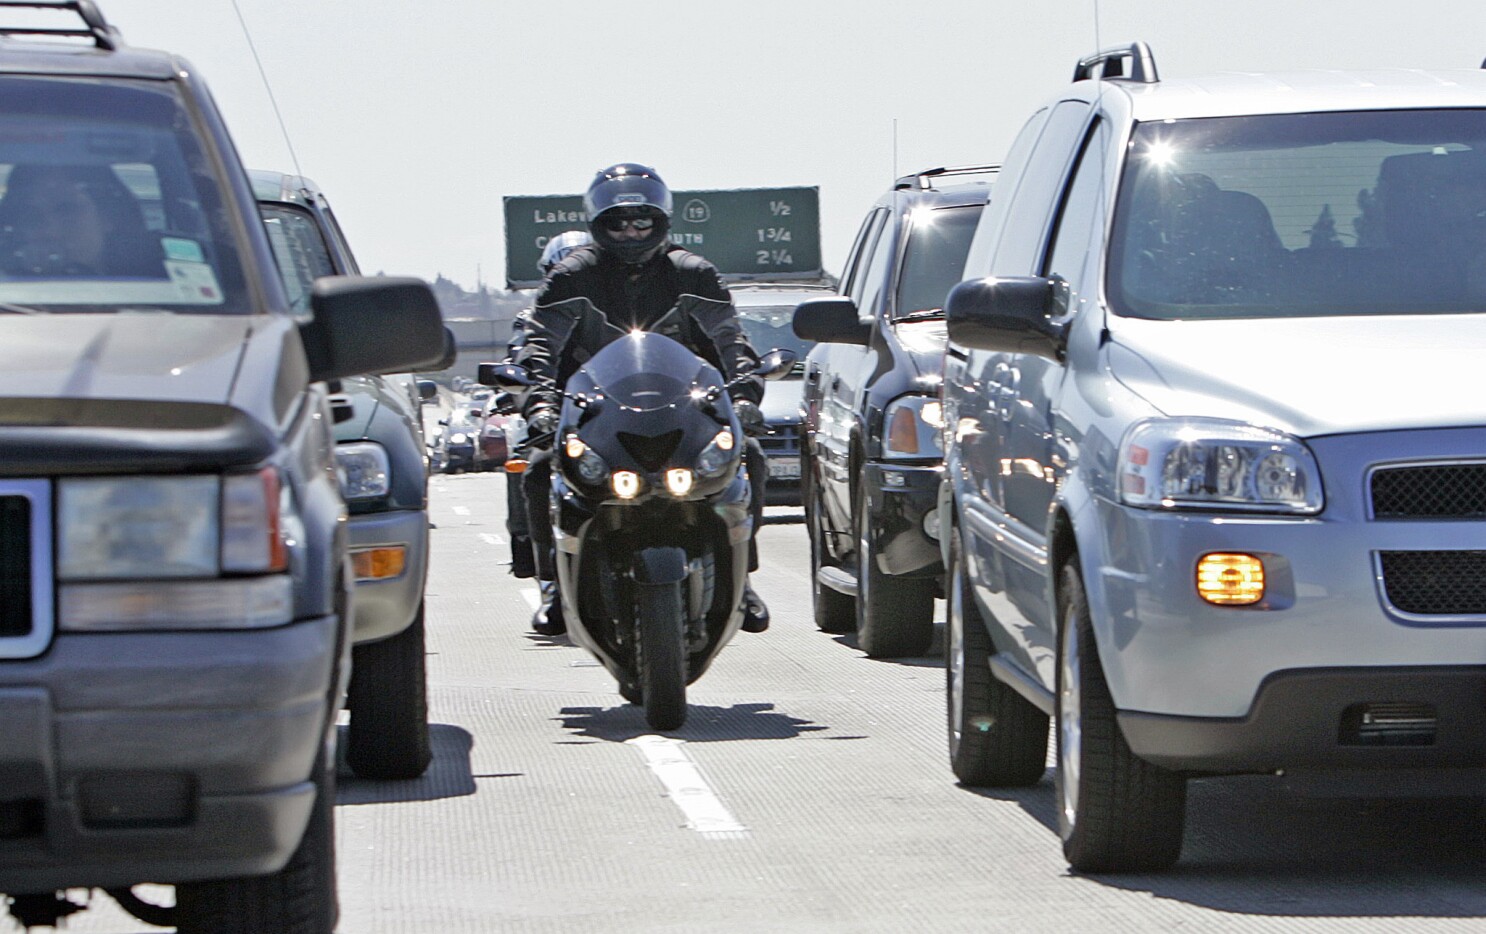 A motorcyclist lane filtering. Media sourced from the LA Times.